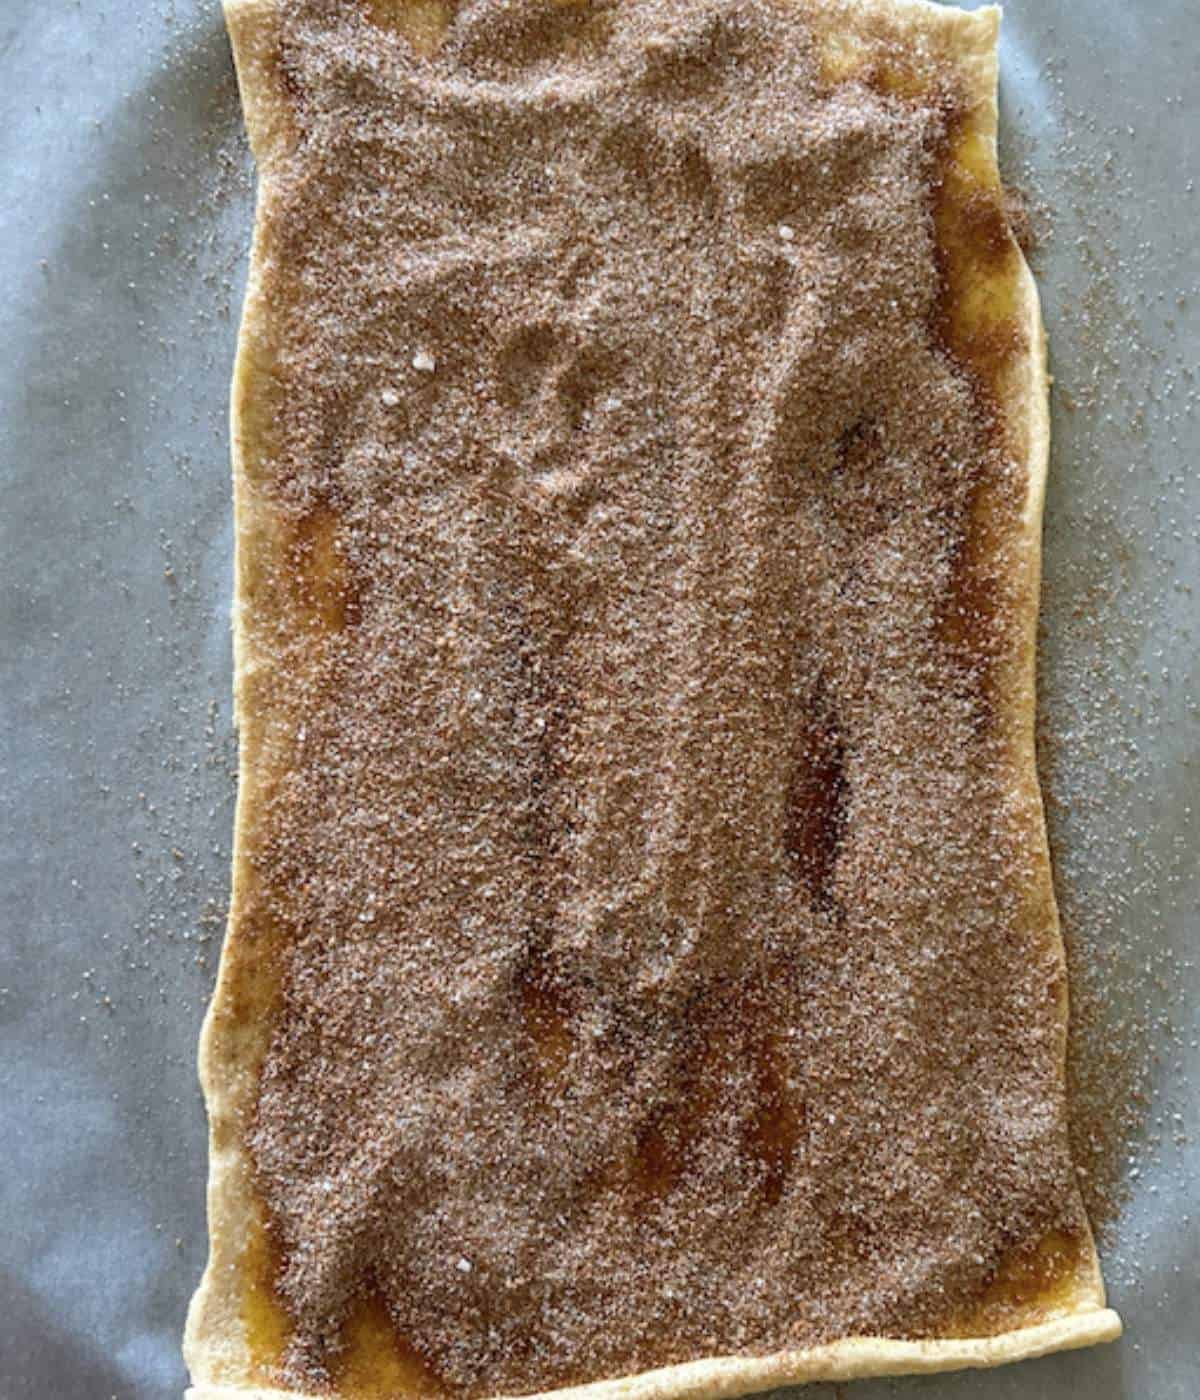 Dough covered with butter and cinnamon sugar mixture.